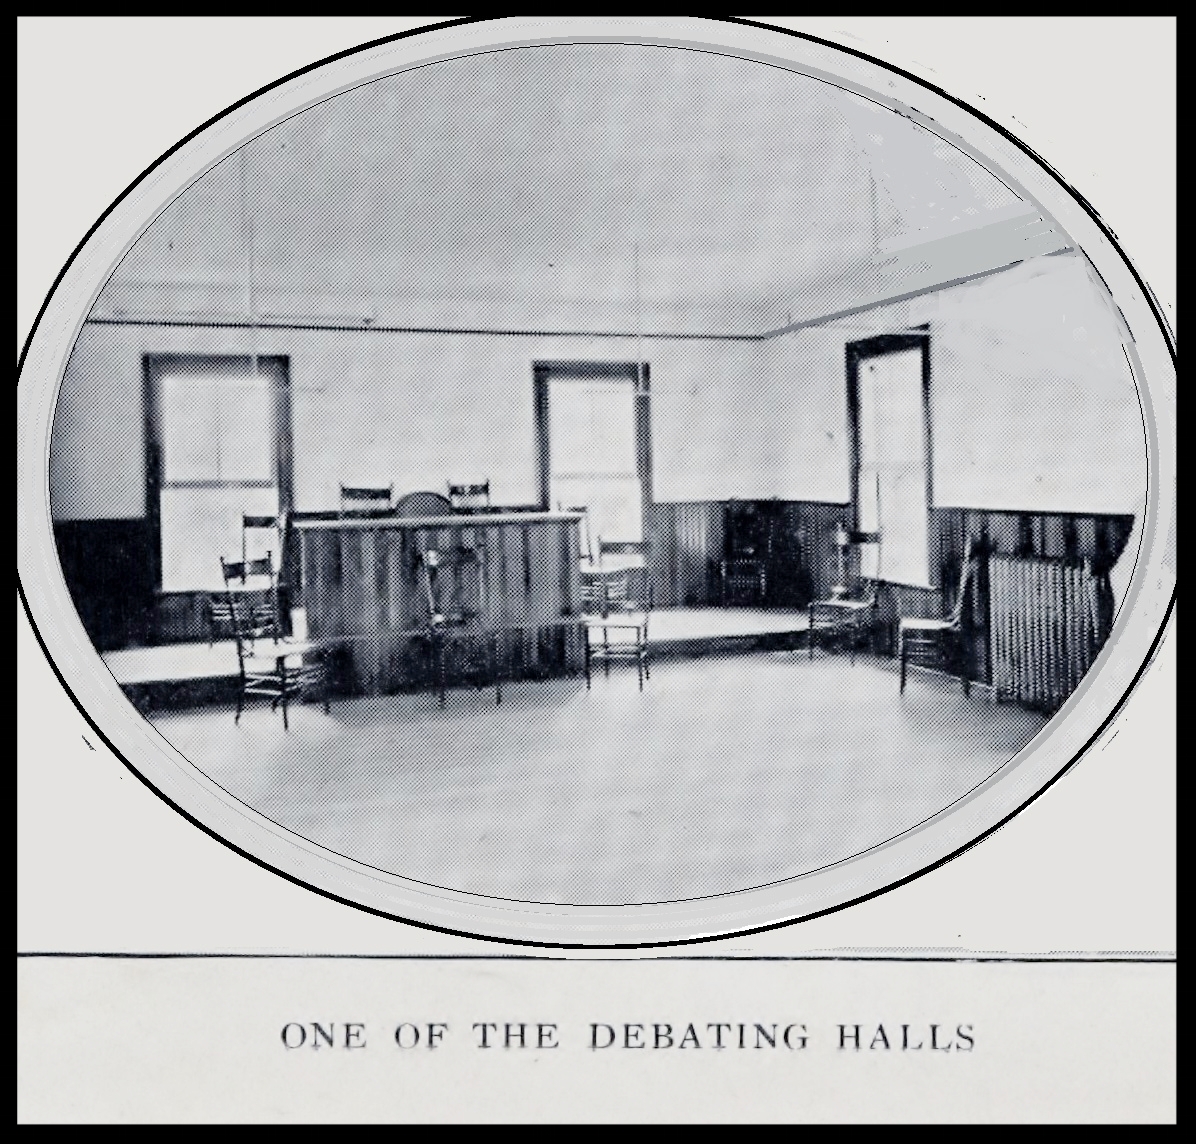 ONE OF THE DEBATING HALLS